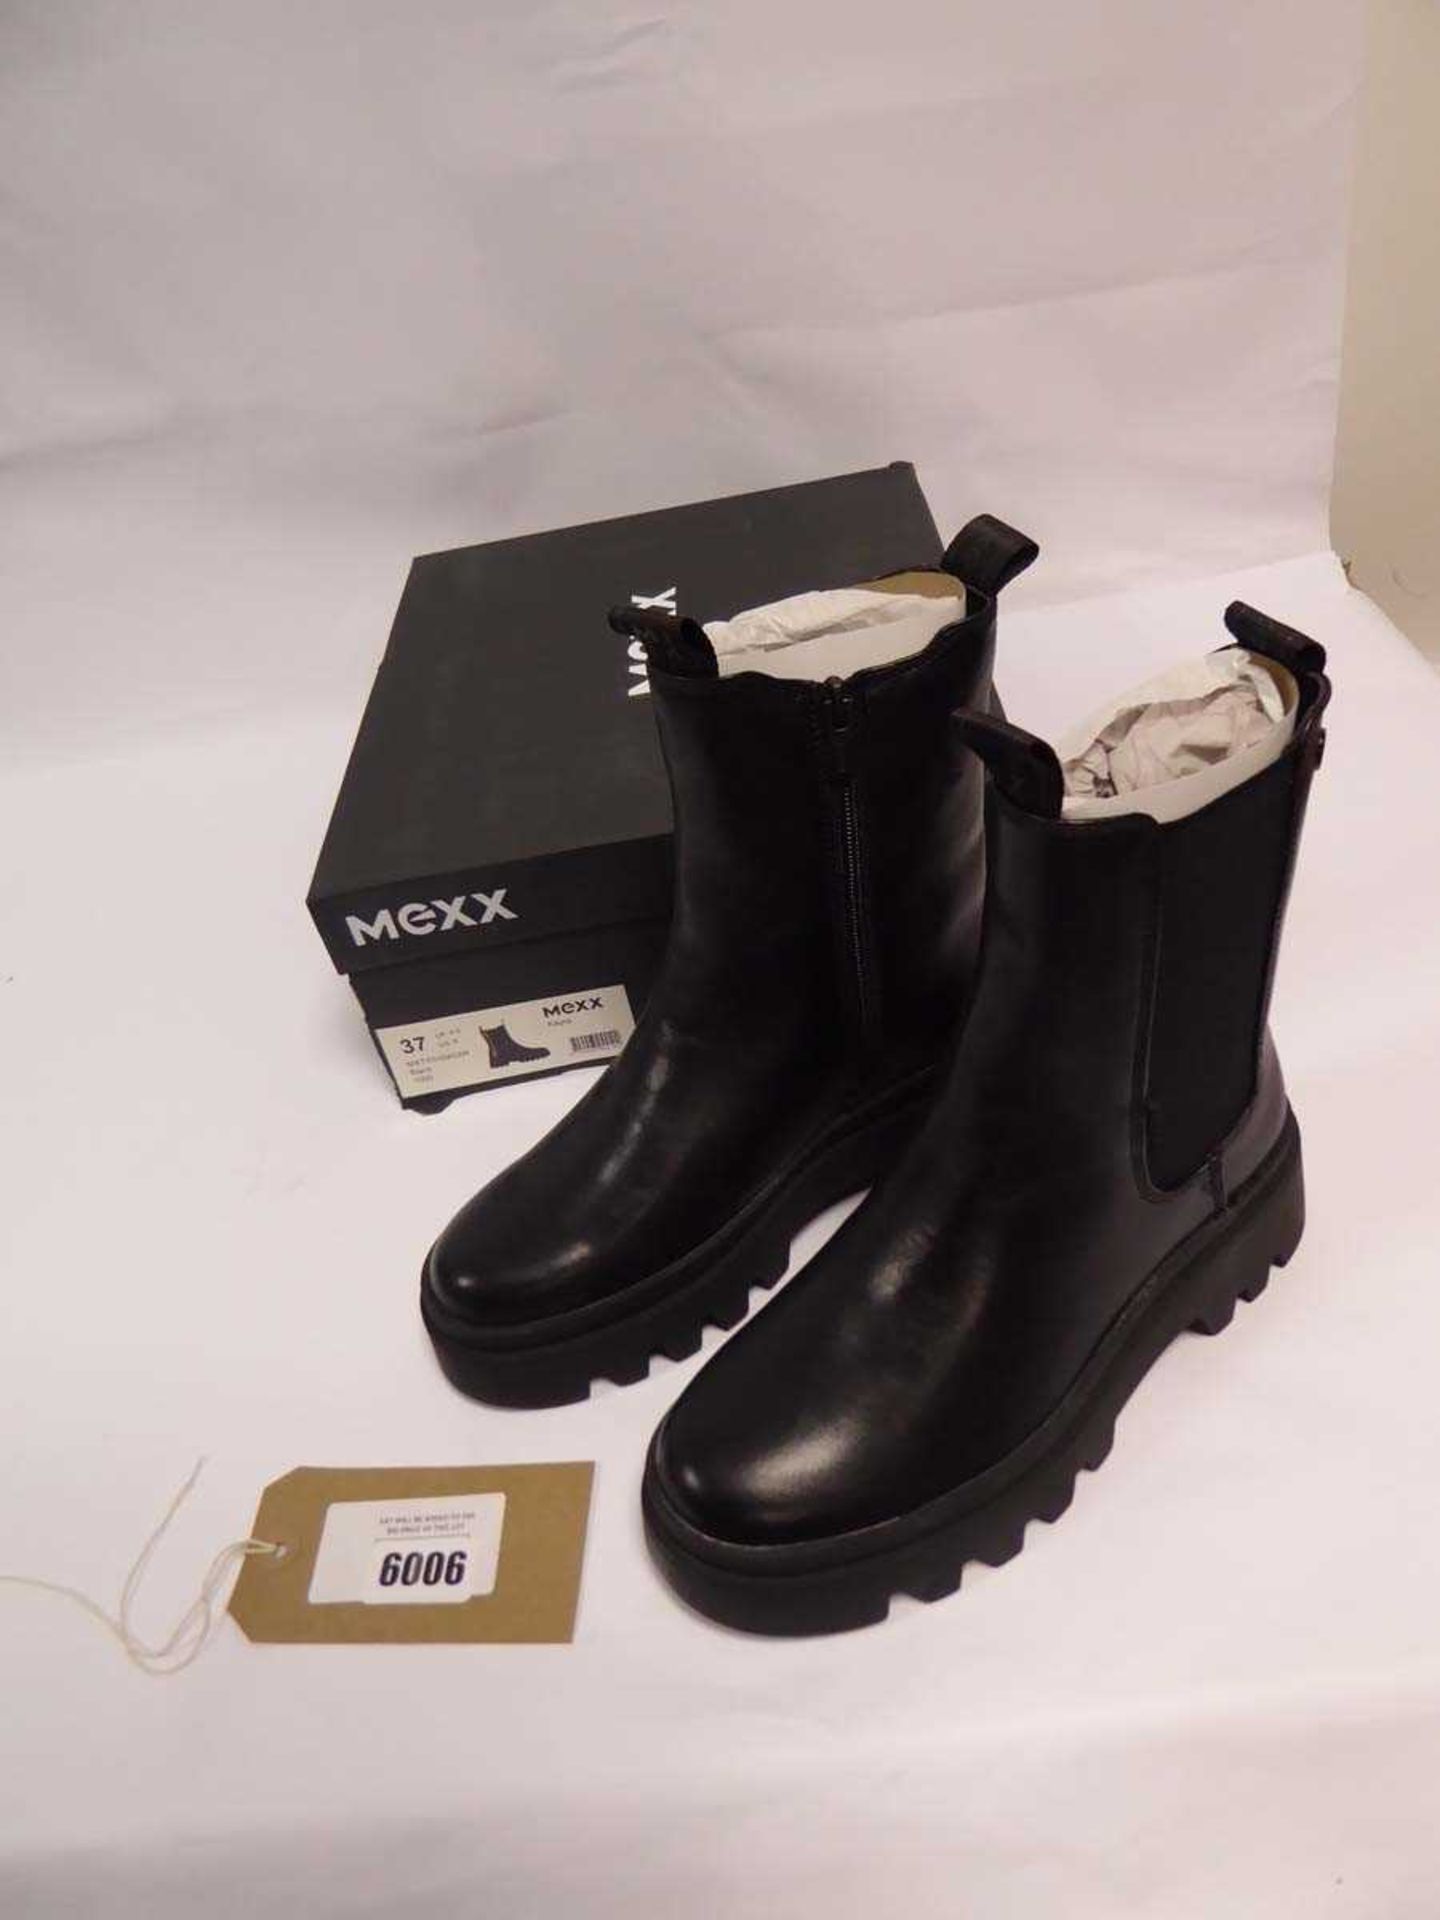 +VAT Pair of boxed Mexx Kayra ankle boots, size 4.5